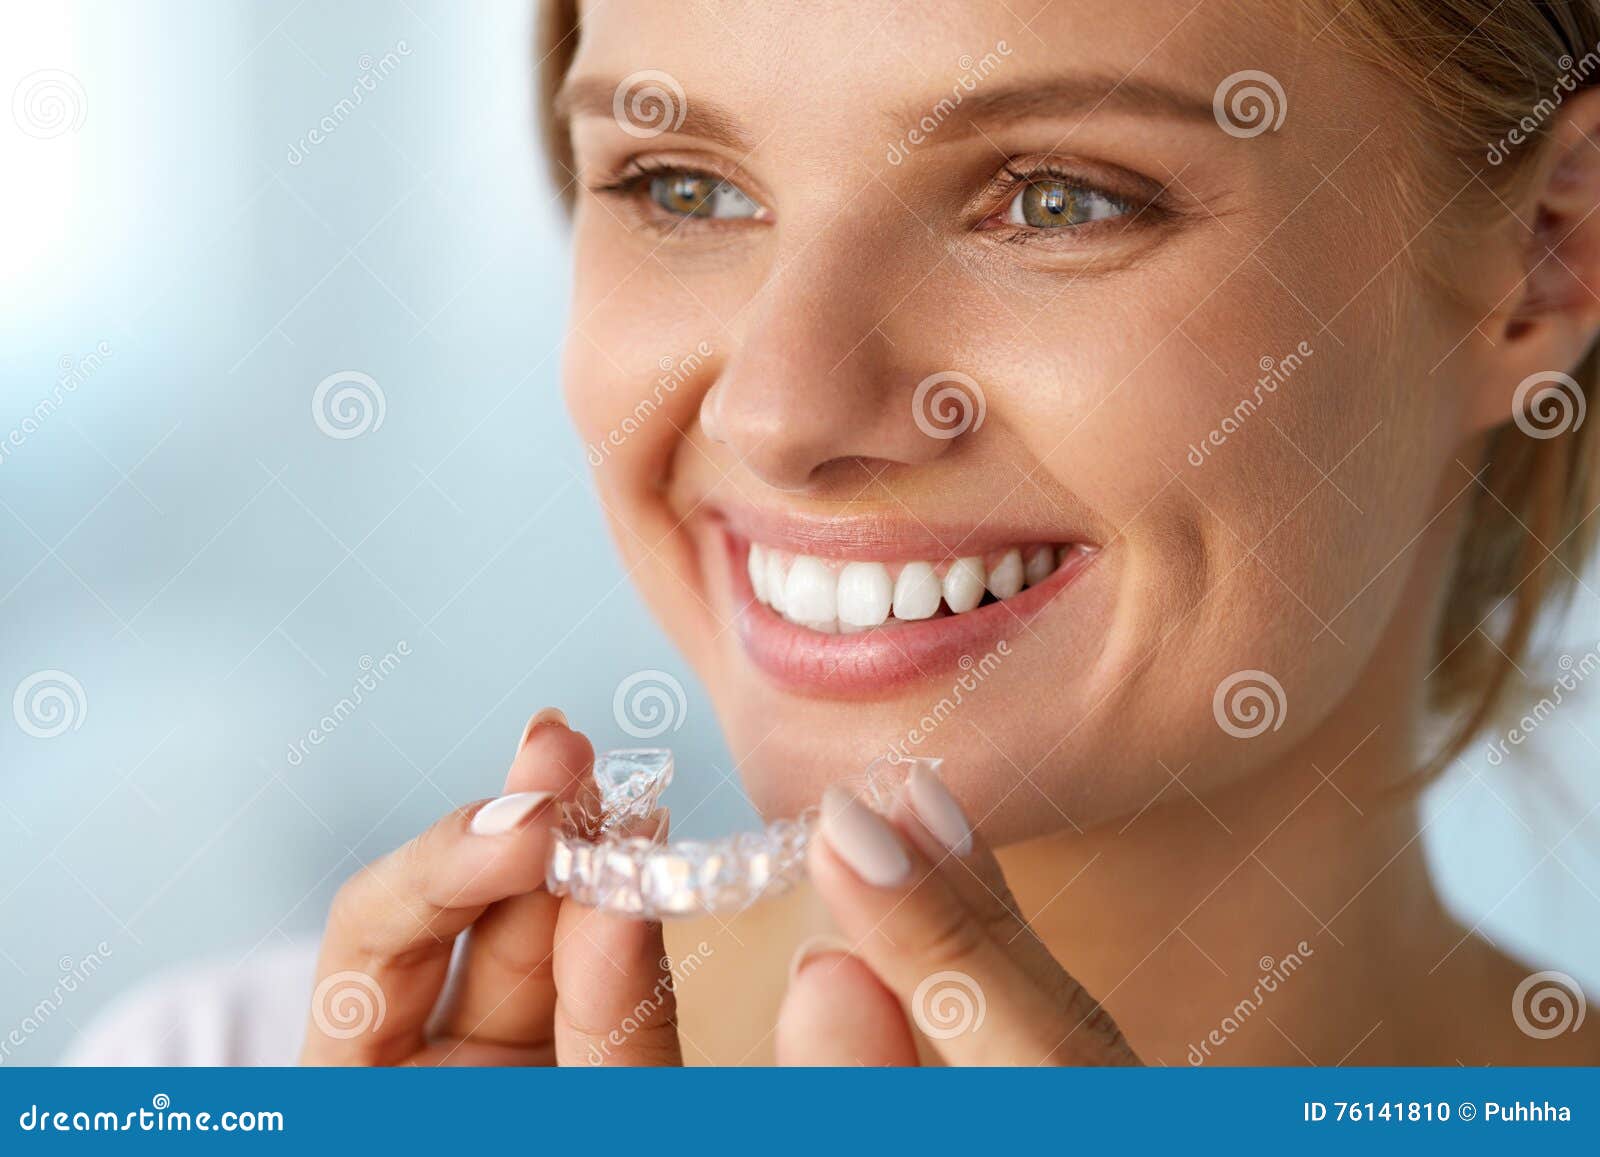 smiling woman with white teeth holding teeth whitening tray